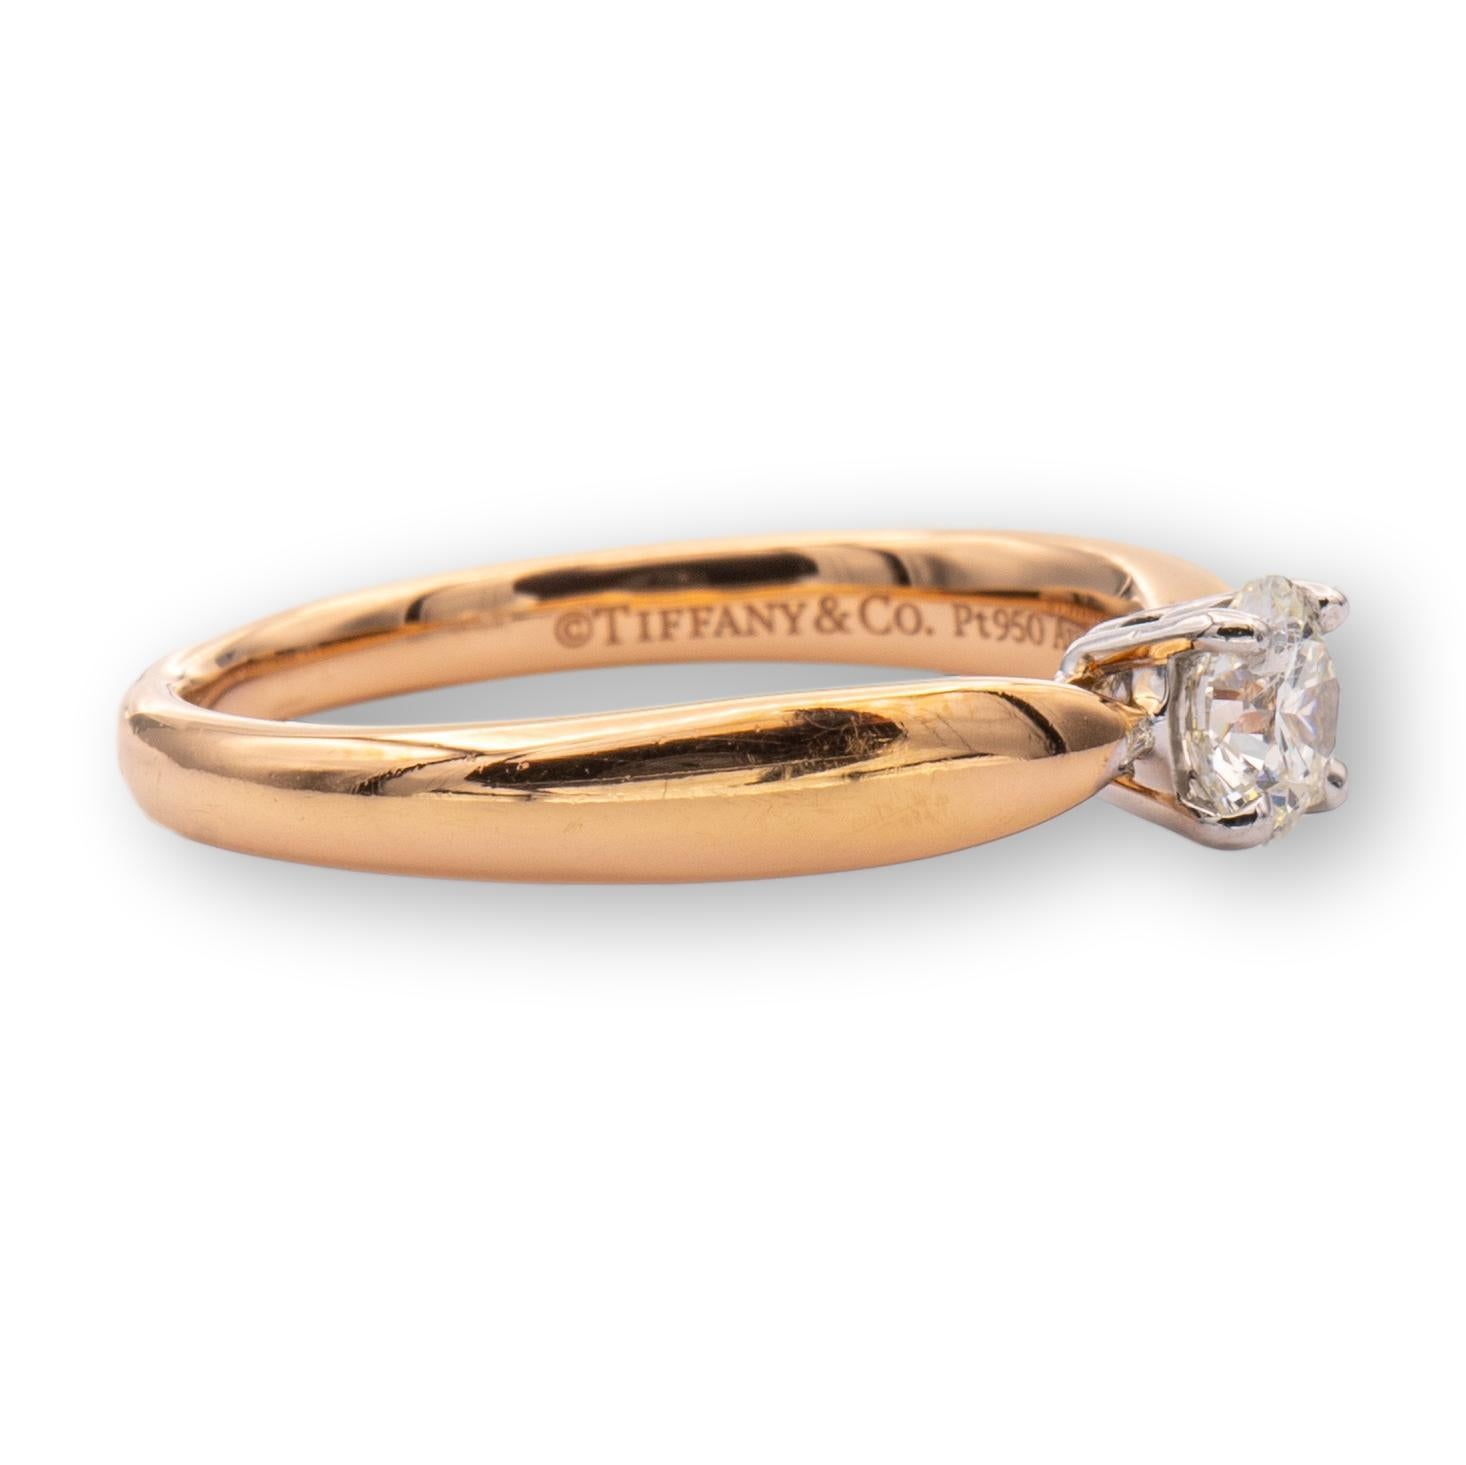 Tiffany & Co. engagement ring from the Harmony collection finally crafted in 18 karat rose gold with a round brilliant cut center diamond weighing 0.31 carats I color VS1 clarity. This ring is set in a platinum basket and rose gold tapered shank